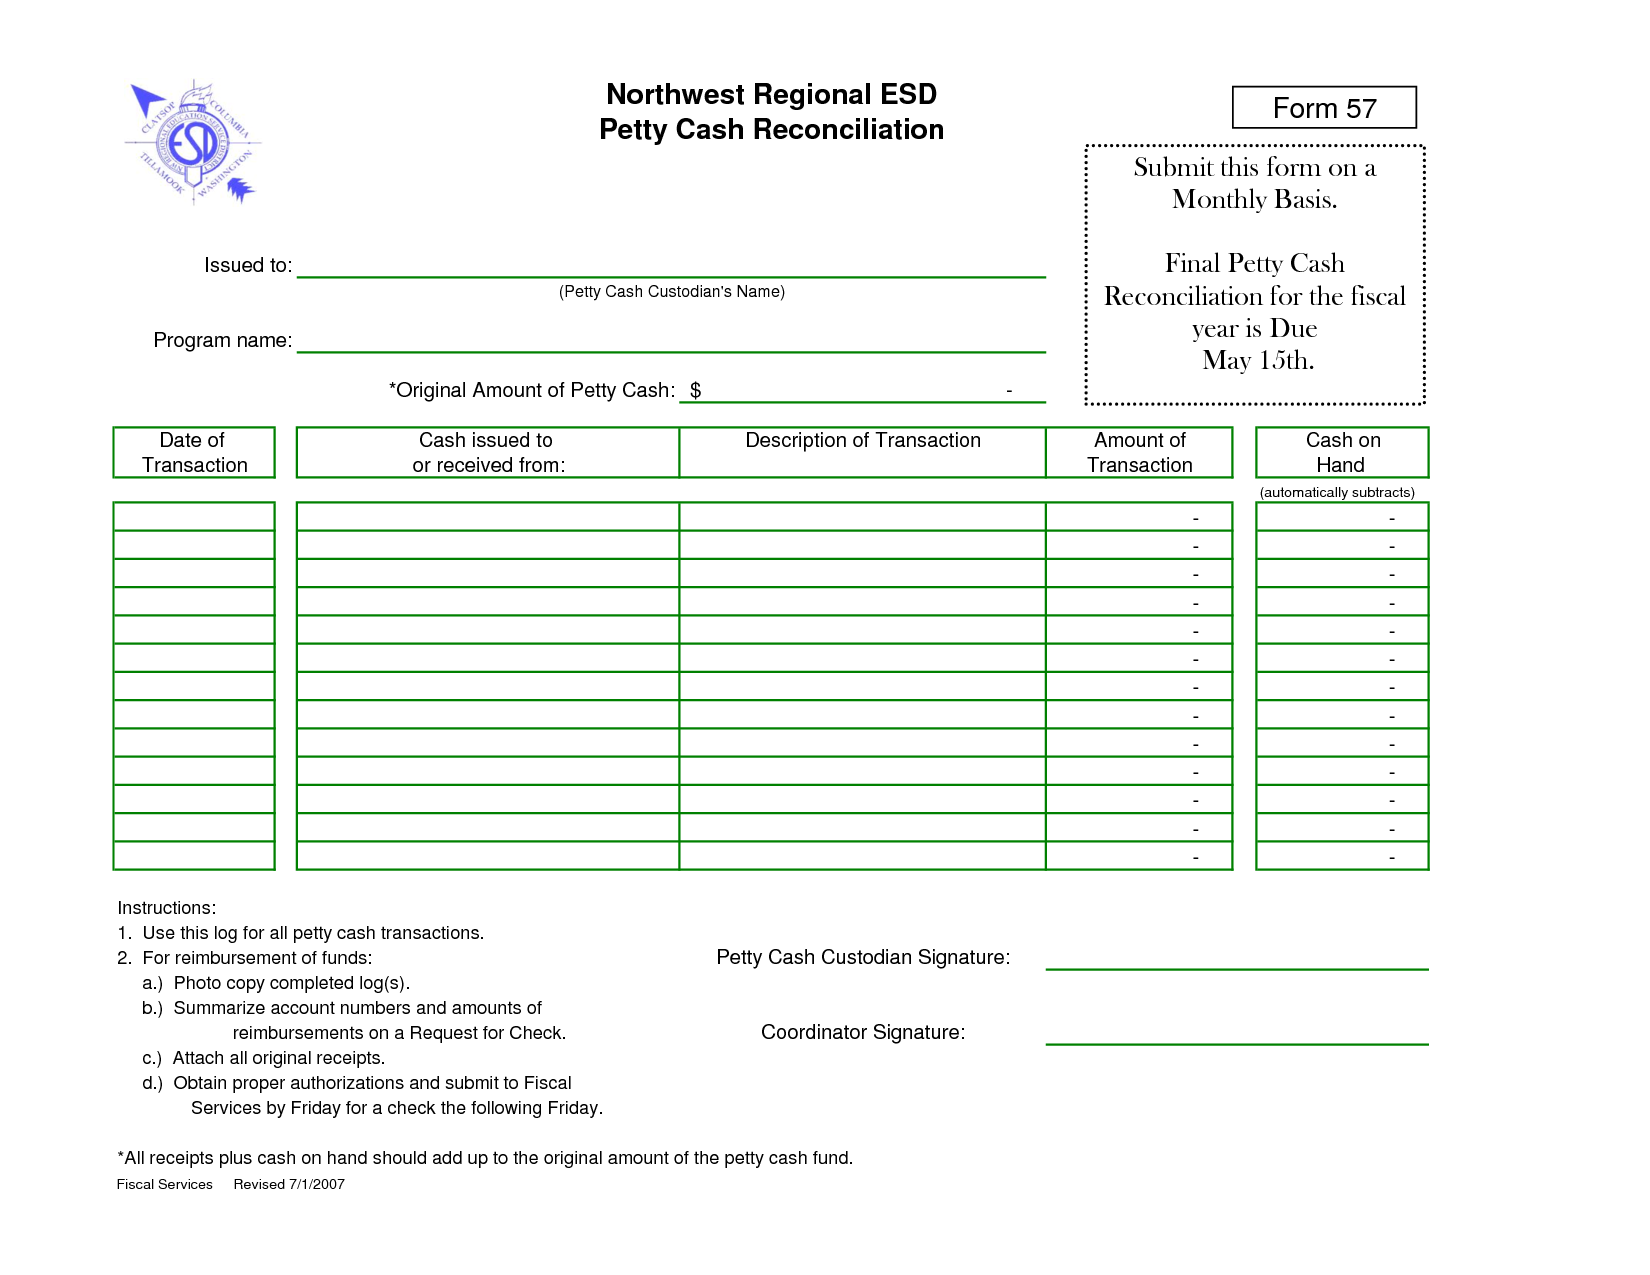 Petty Cash Reconciliation   Fill Online, Printable, Fillable 